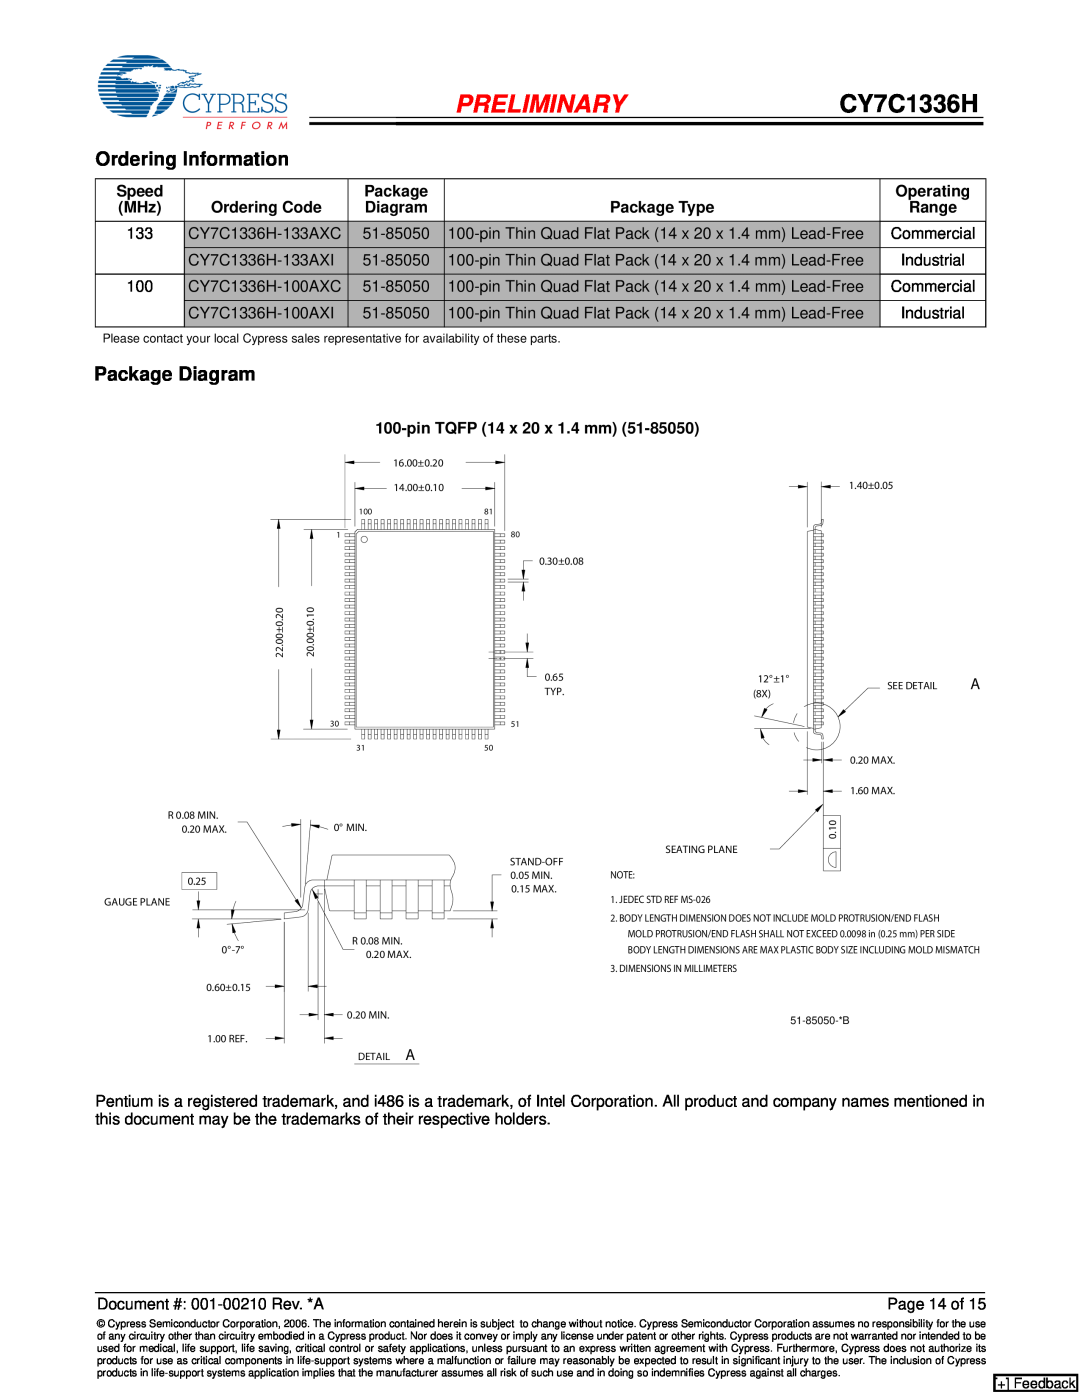 Cypress CY7C1336H manual Ordering Information, Package Diagram, Preliminary 